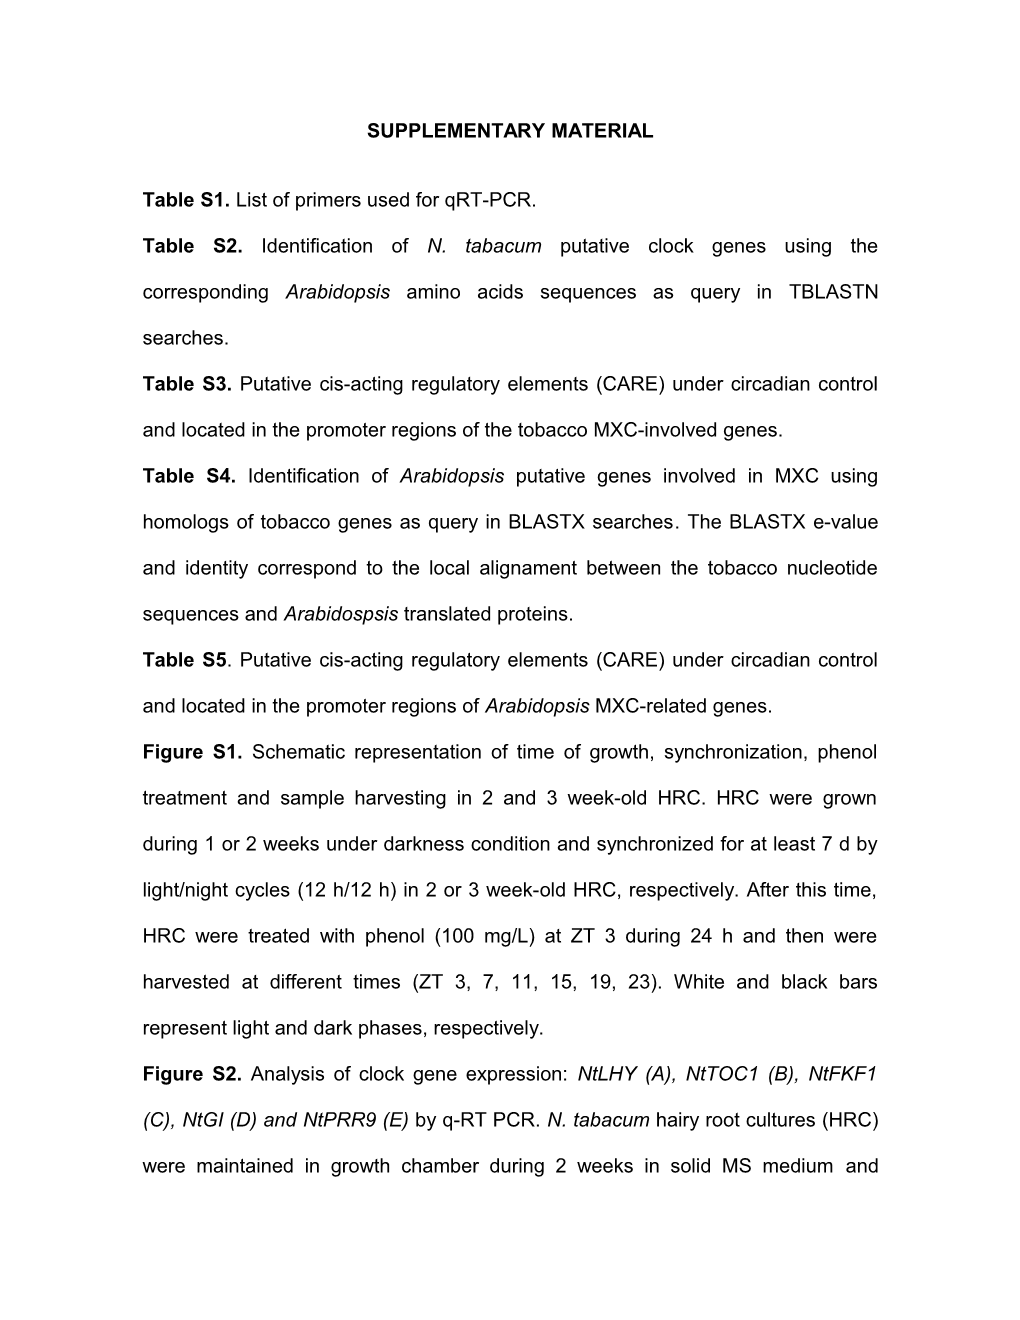 Table S1. List of Primers Used for Qrt-PCR